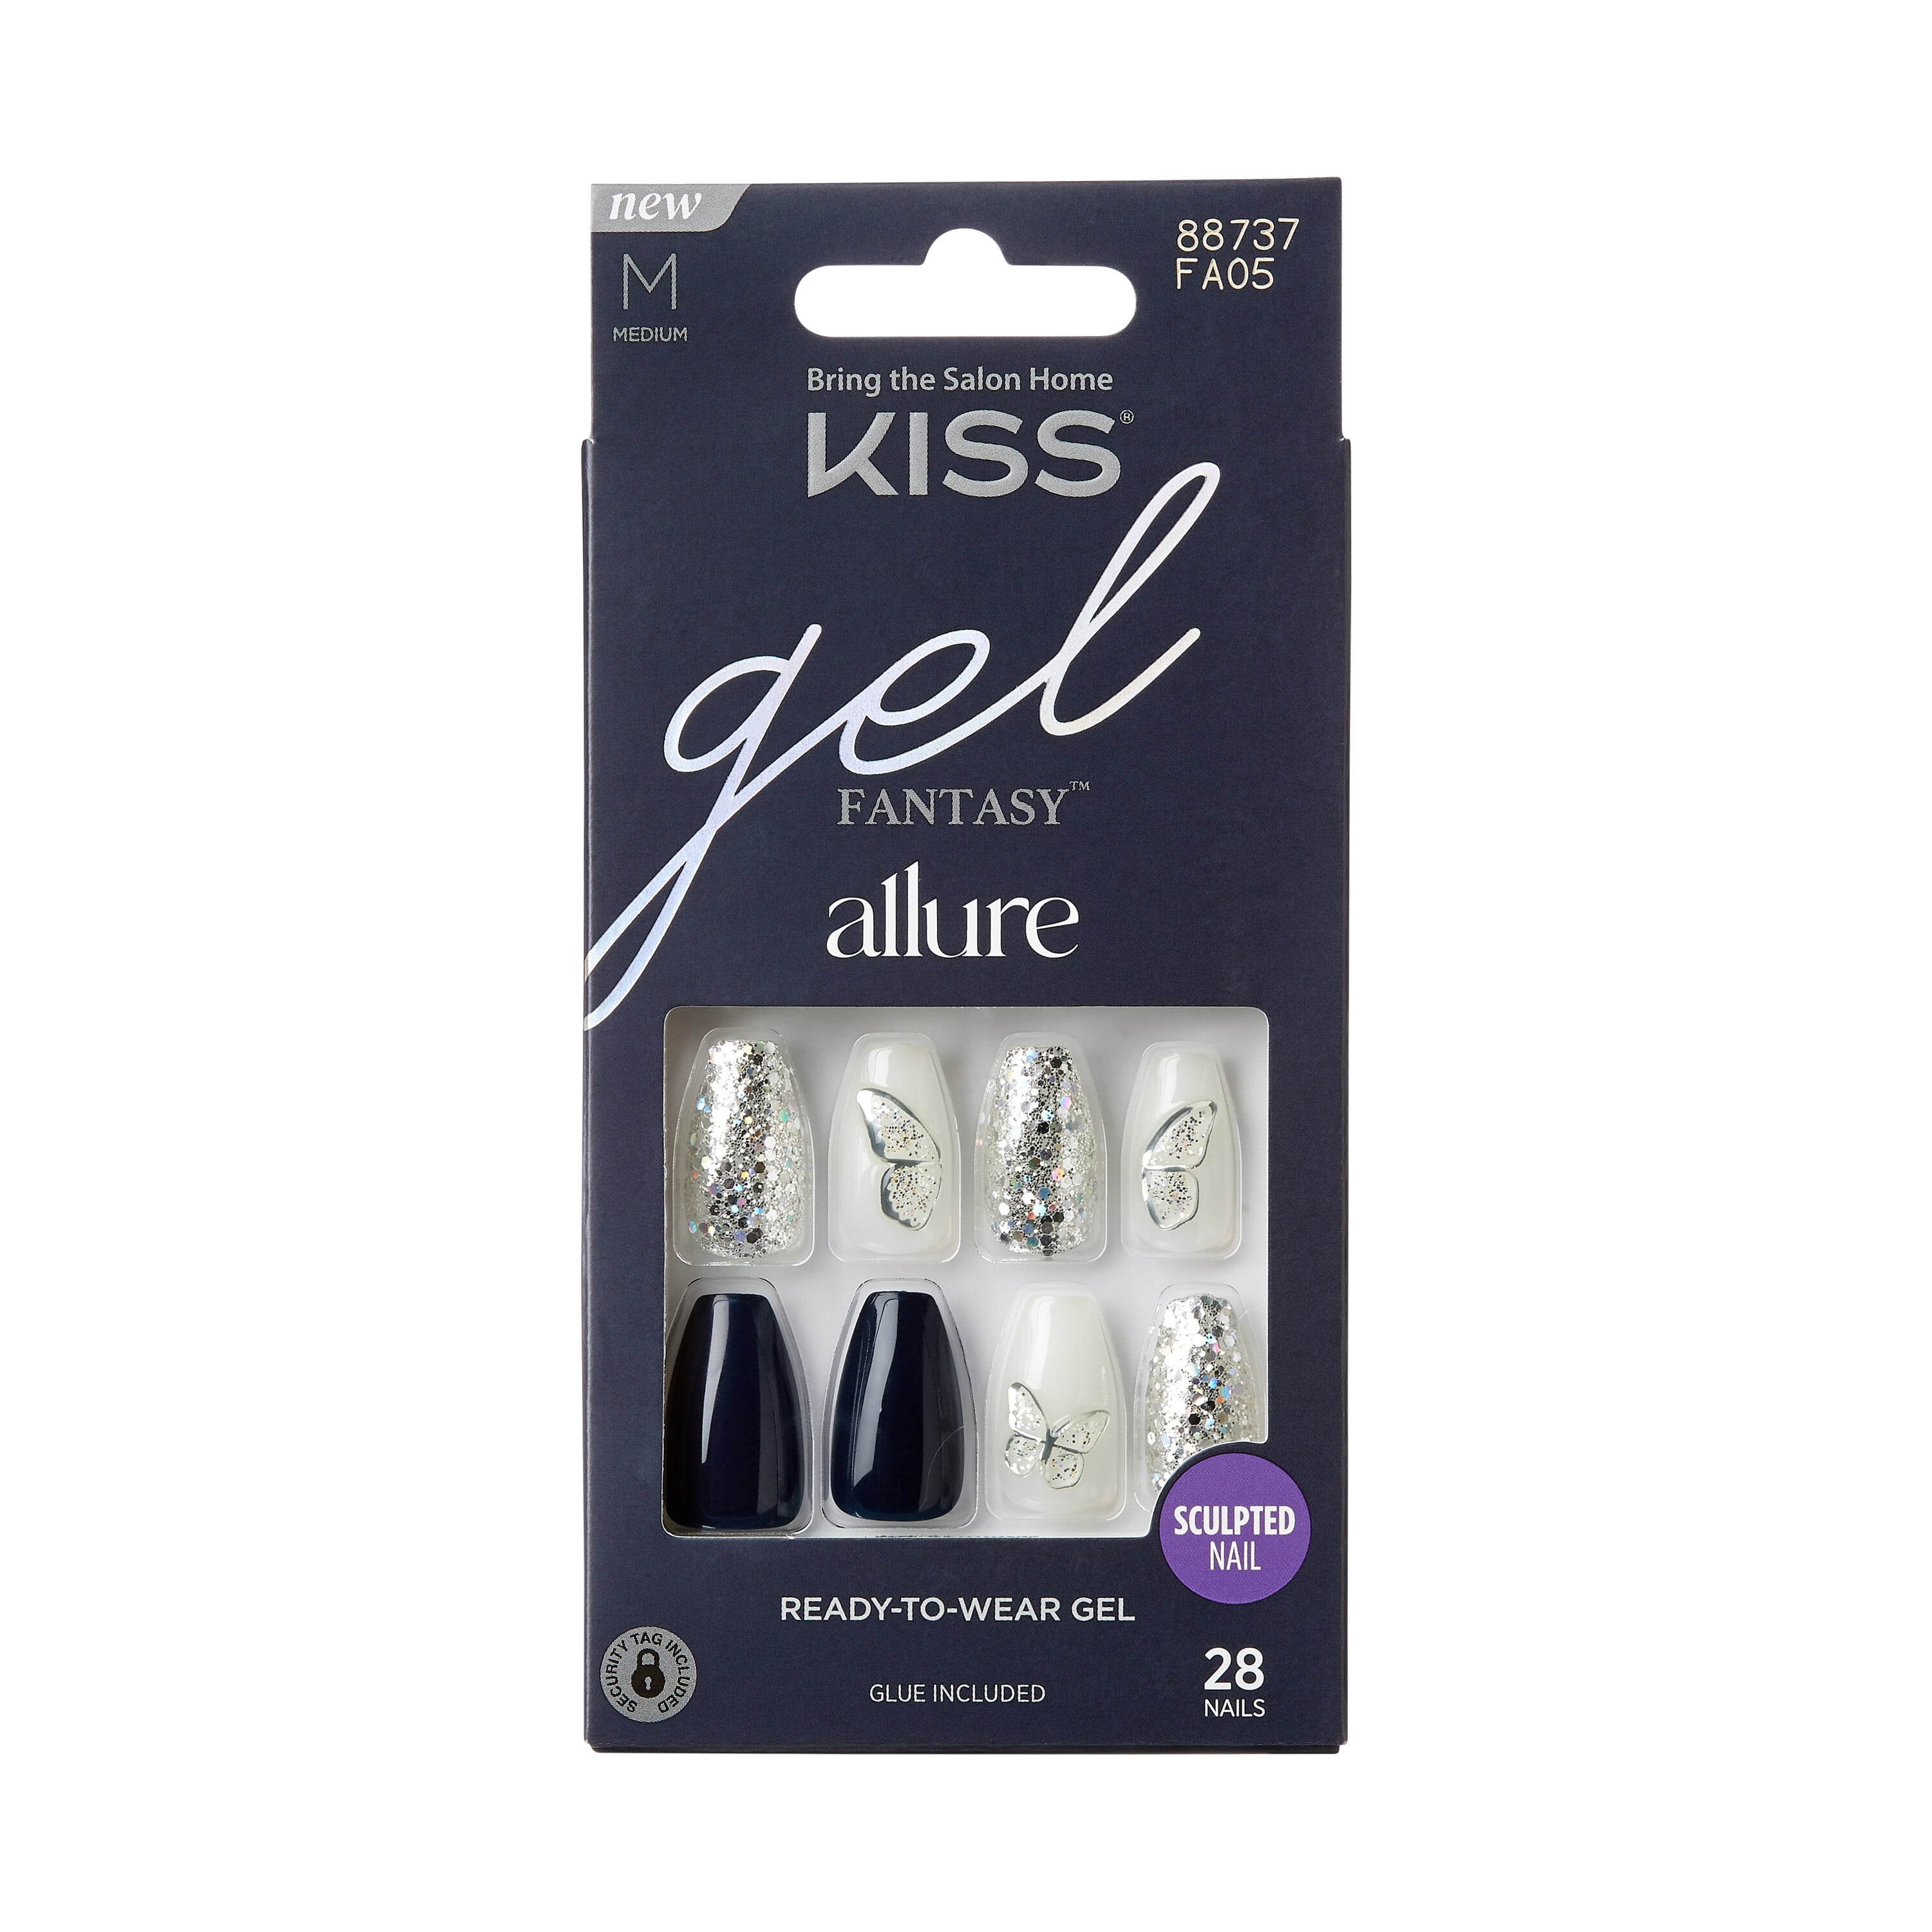 KISS Gel Fantasy Sculpted Long Coffin Glue-On Nails, Glossy Light White,  'True Color', 28 Ct. - Walmart.com